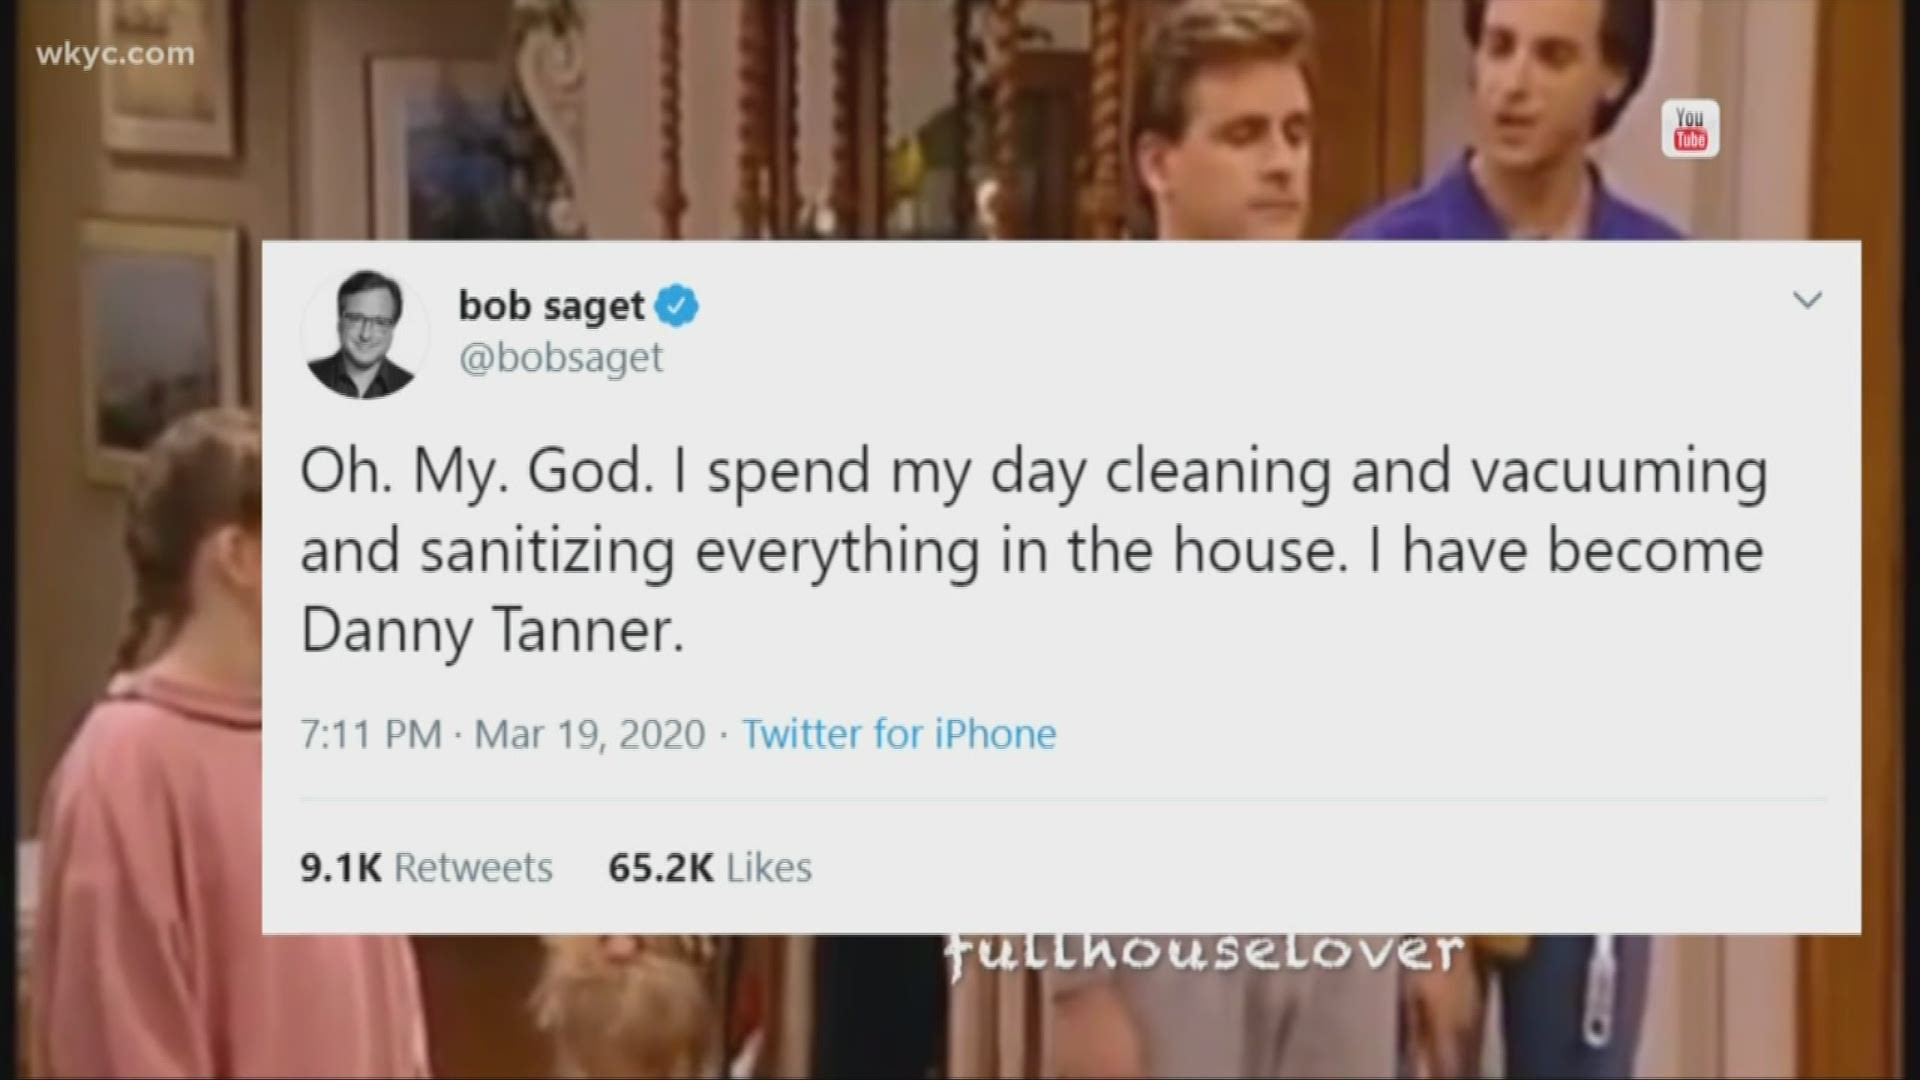 The former 'Full House' star says he has been cleaning everything lately, much like his character. Stephanie Haney has that story & more!